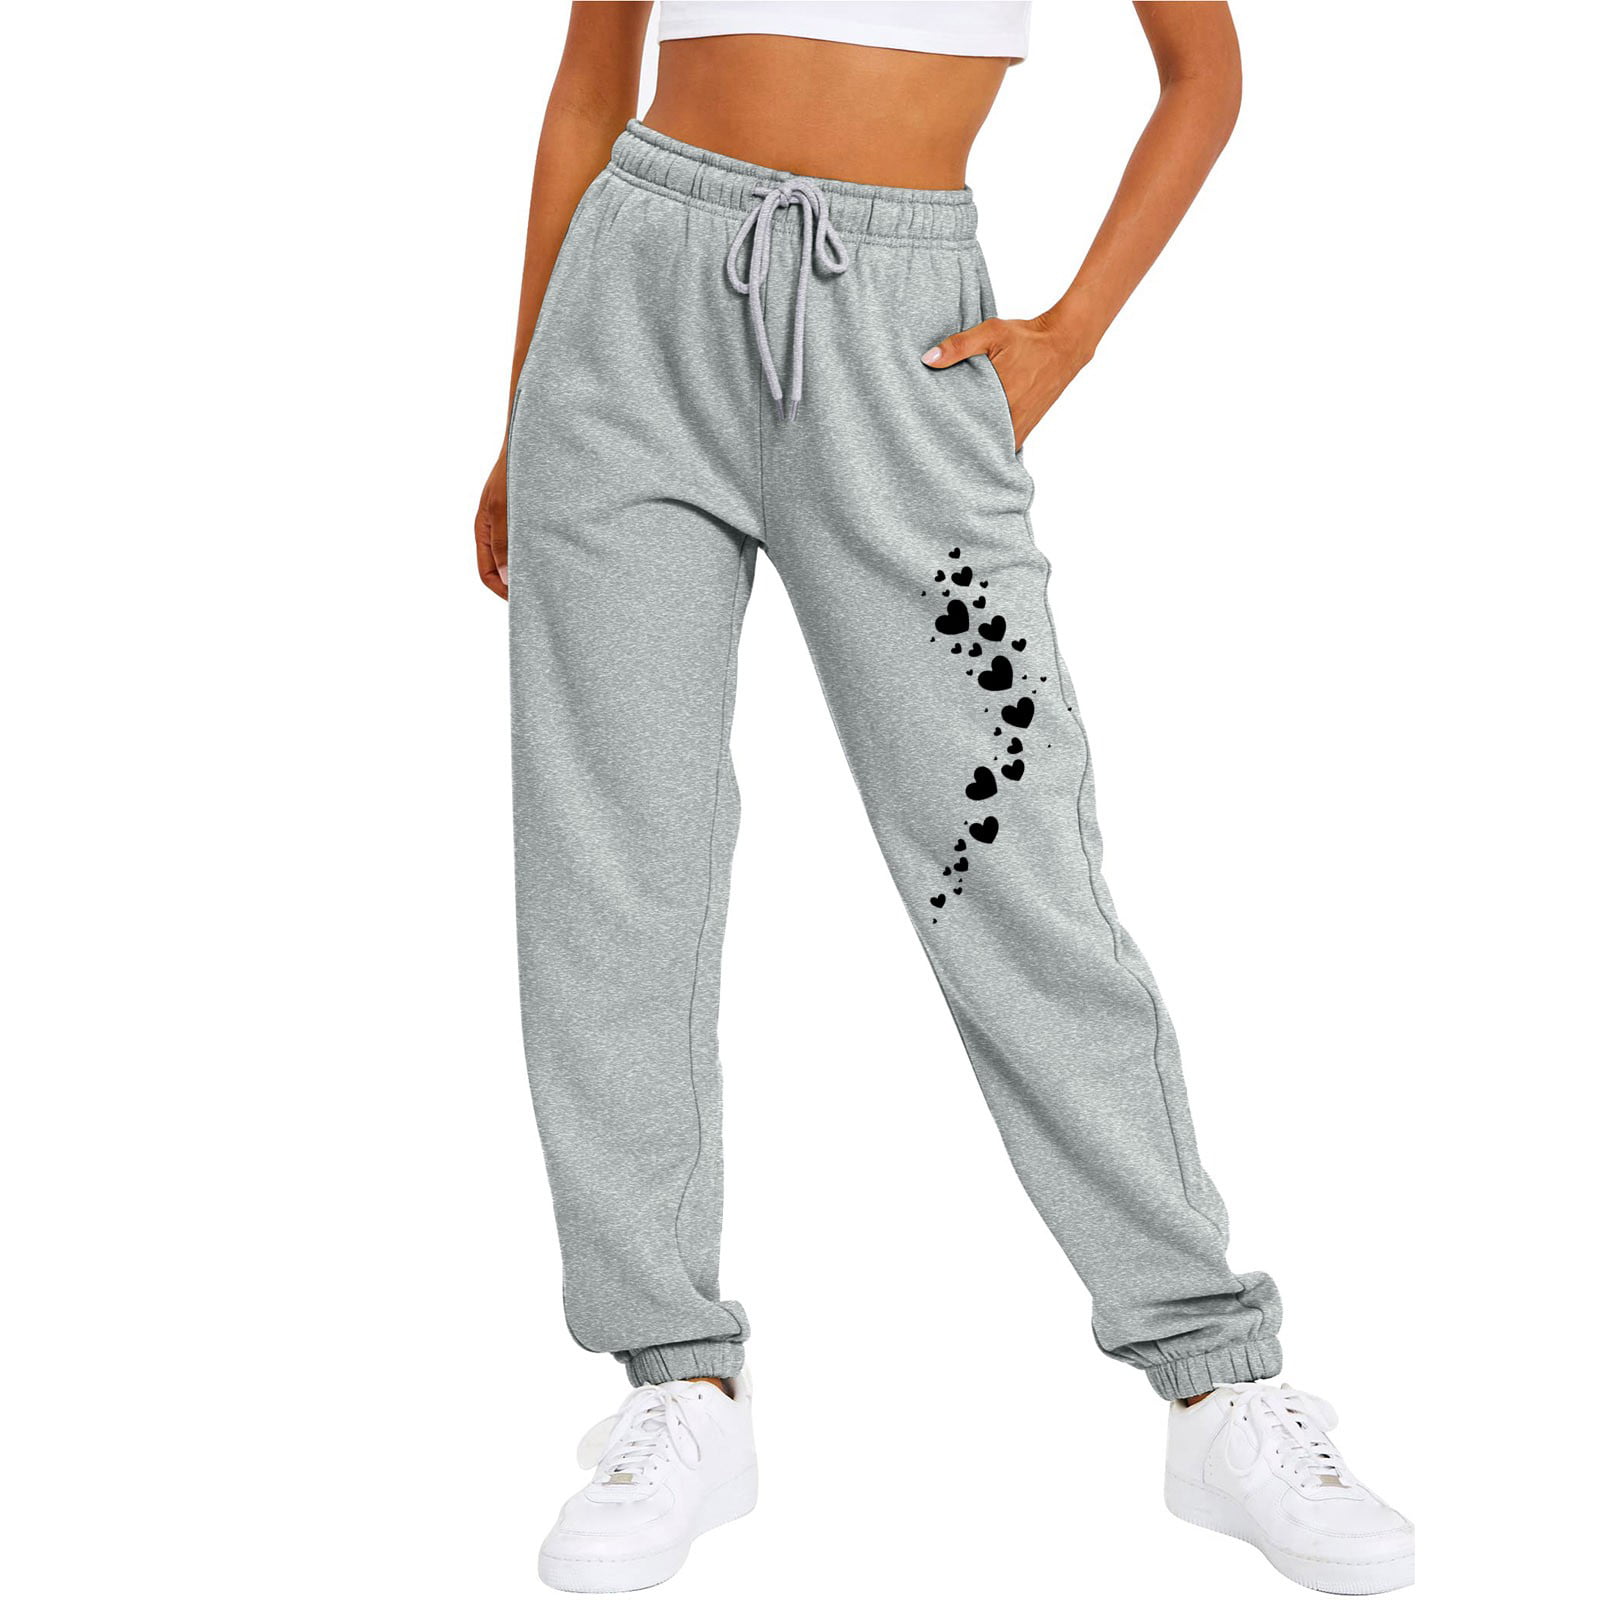 Aayomet Sweat Pants Women's Active High Waisted Sporty Gym Fit Jogger  Sweatpants Baggy Lounge Pants with Pockets,Gray M 